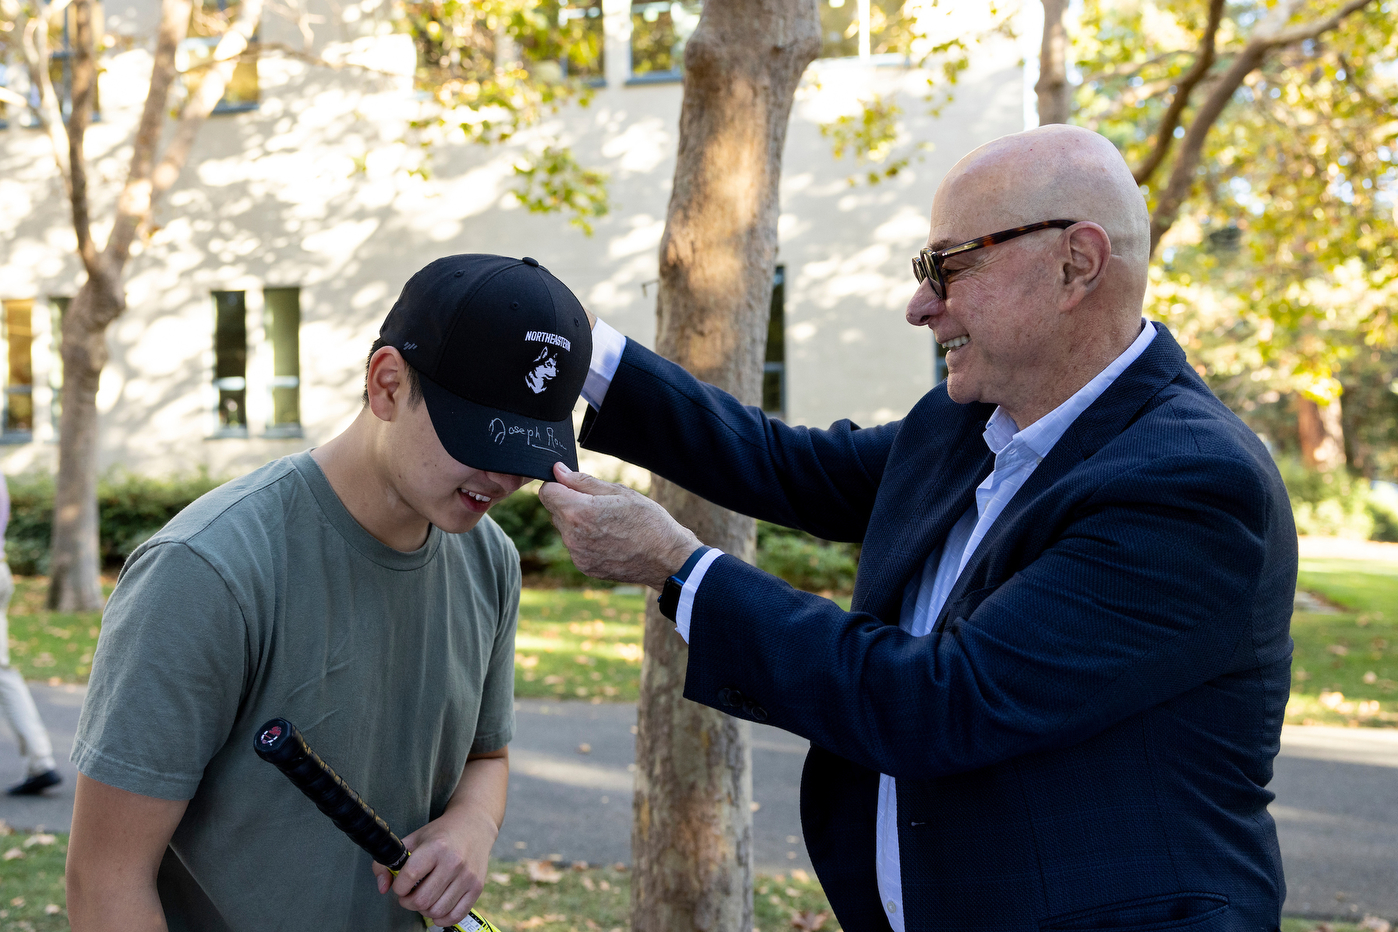 President Aoun putting a Northeastern branded baseball cap with his autograph on a student's head.